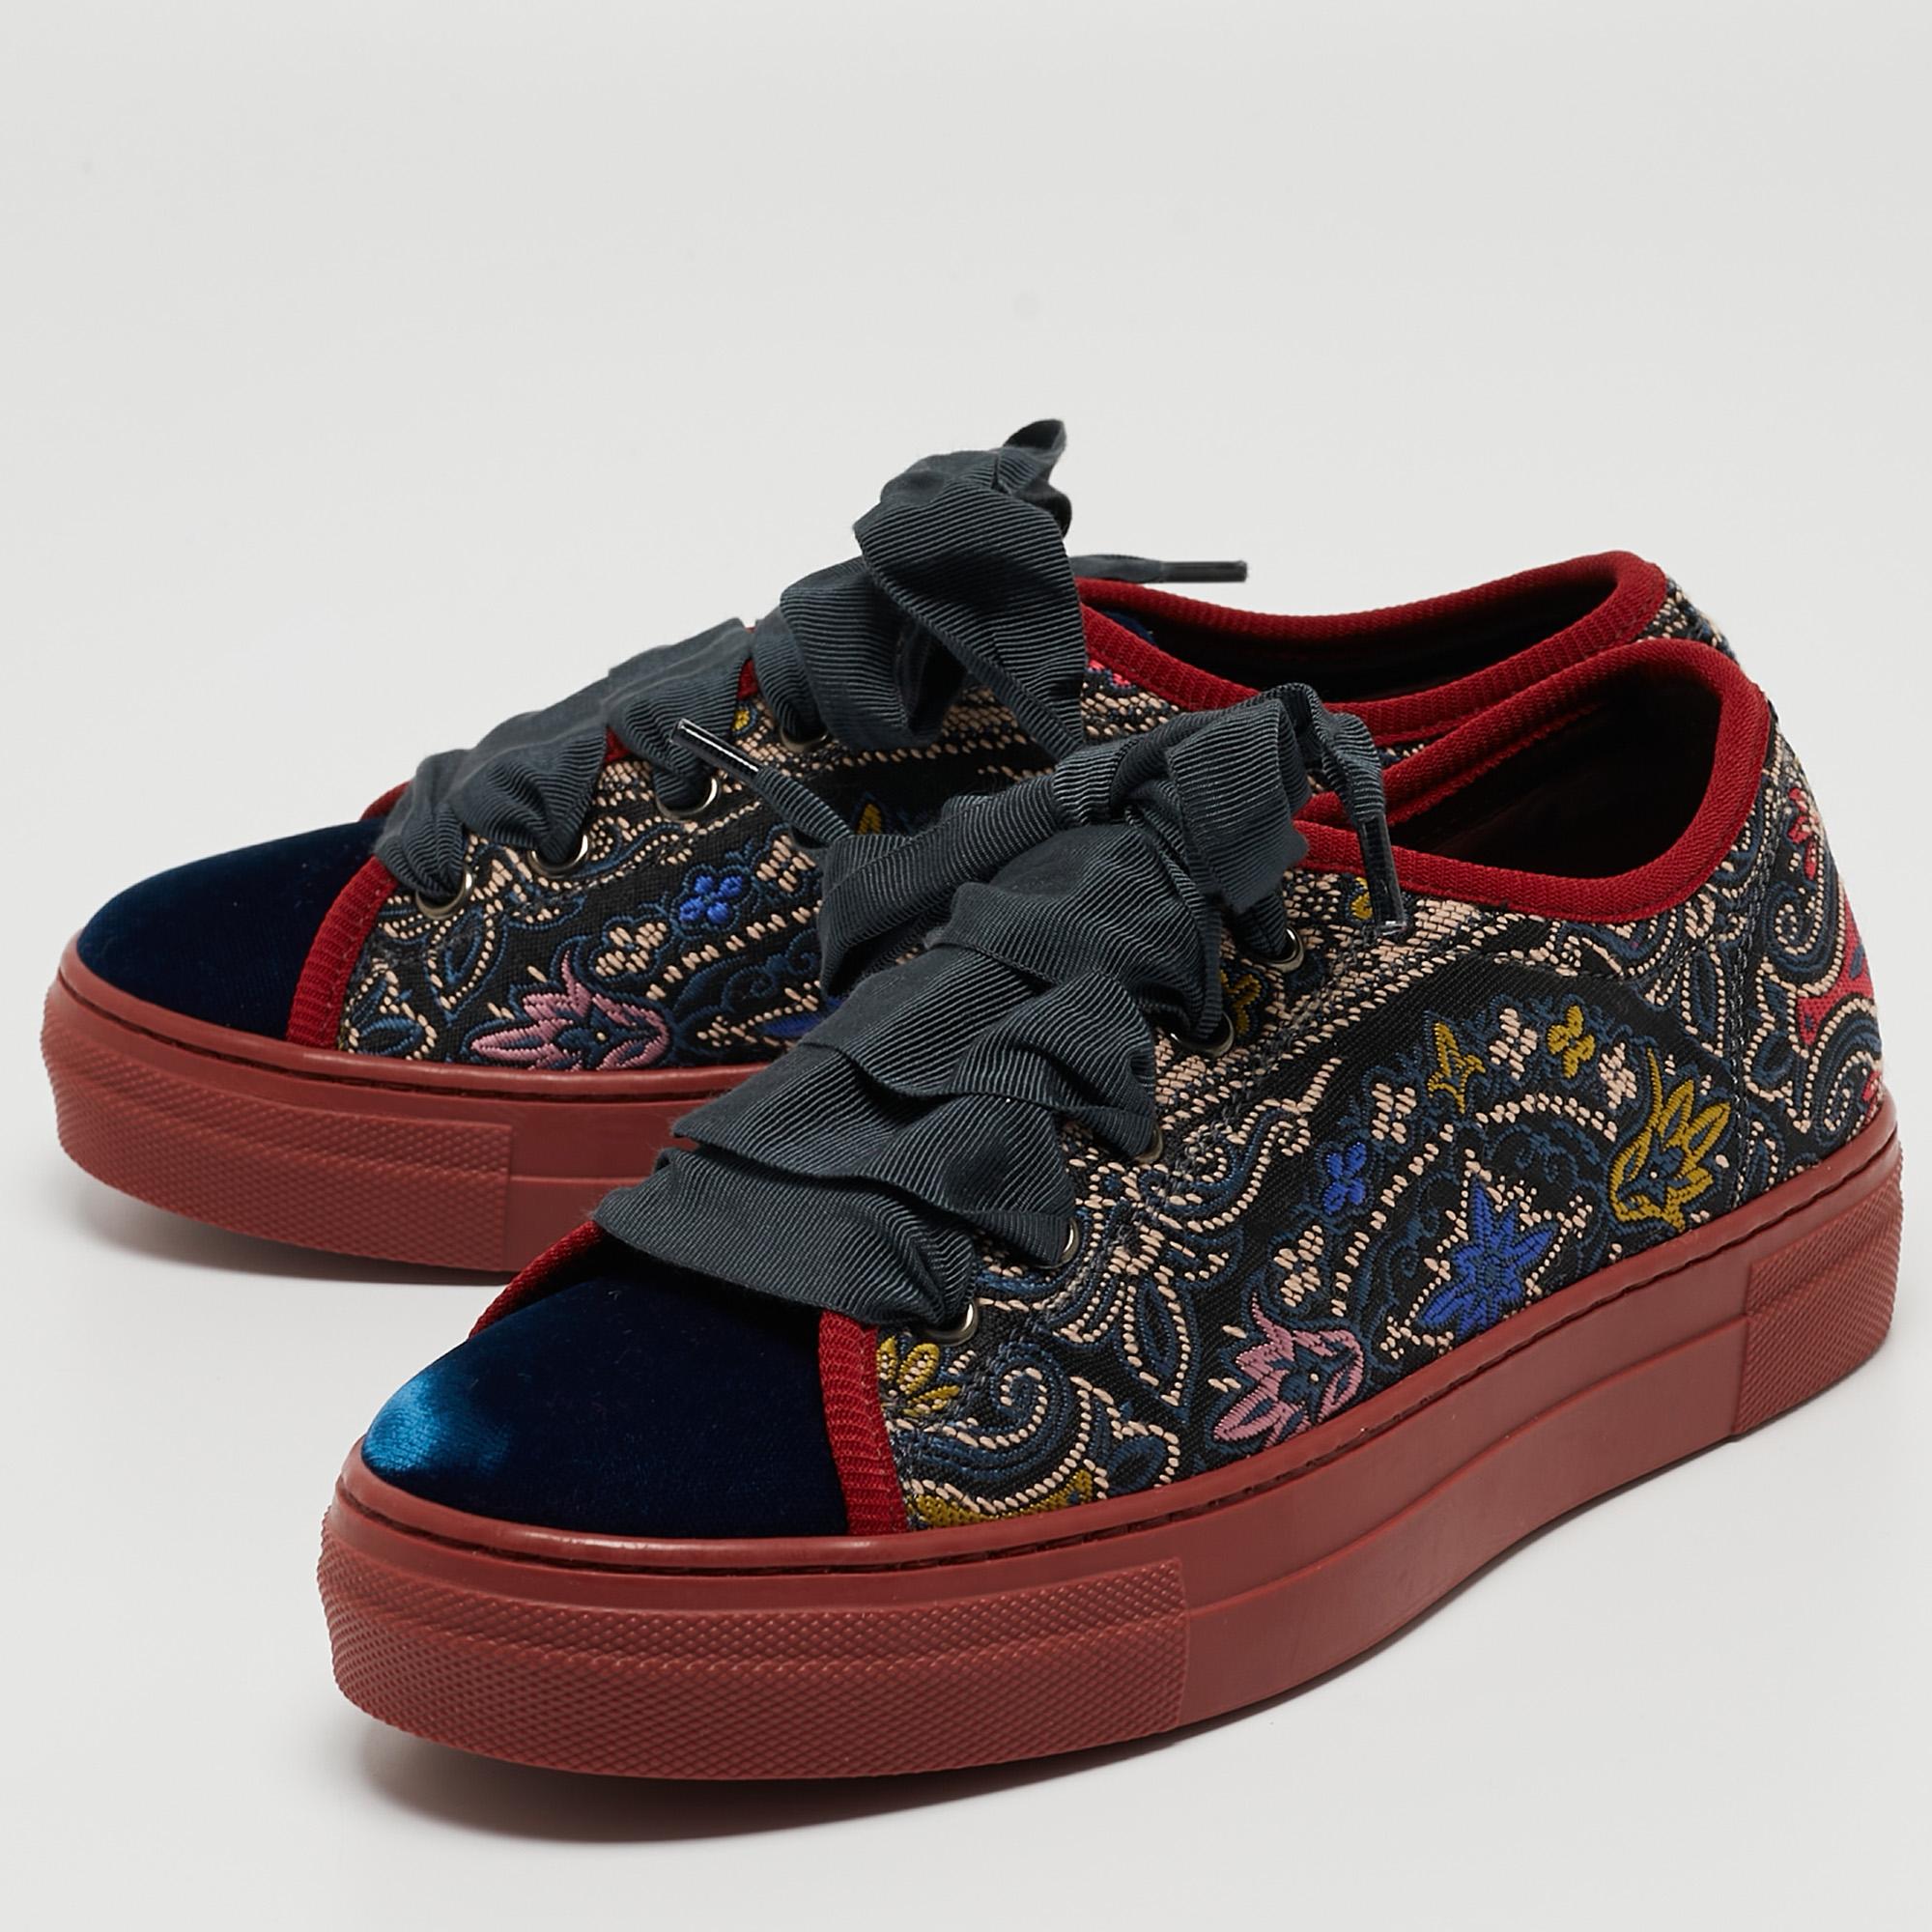 Etro Multicolor Embroidered Fabric and Velvet Low Top Sneakers Size 36 3